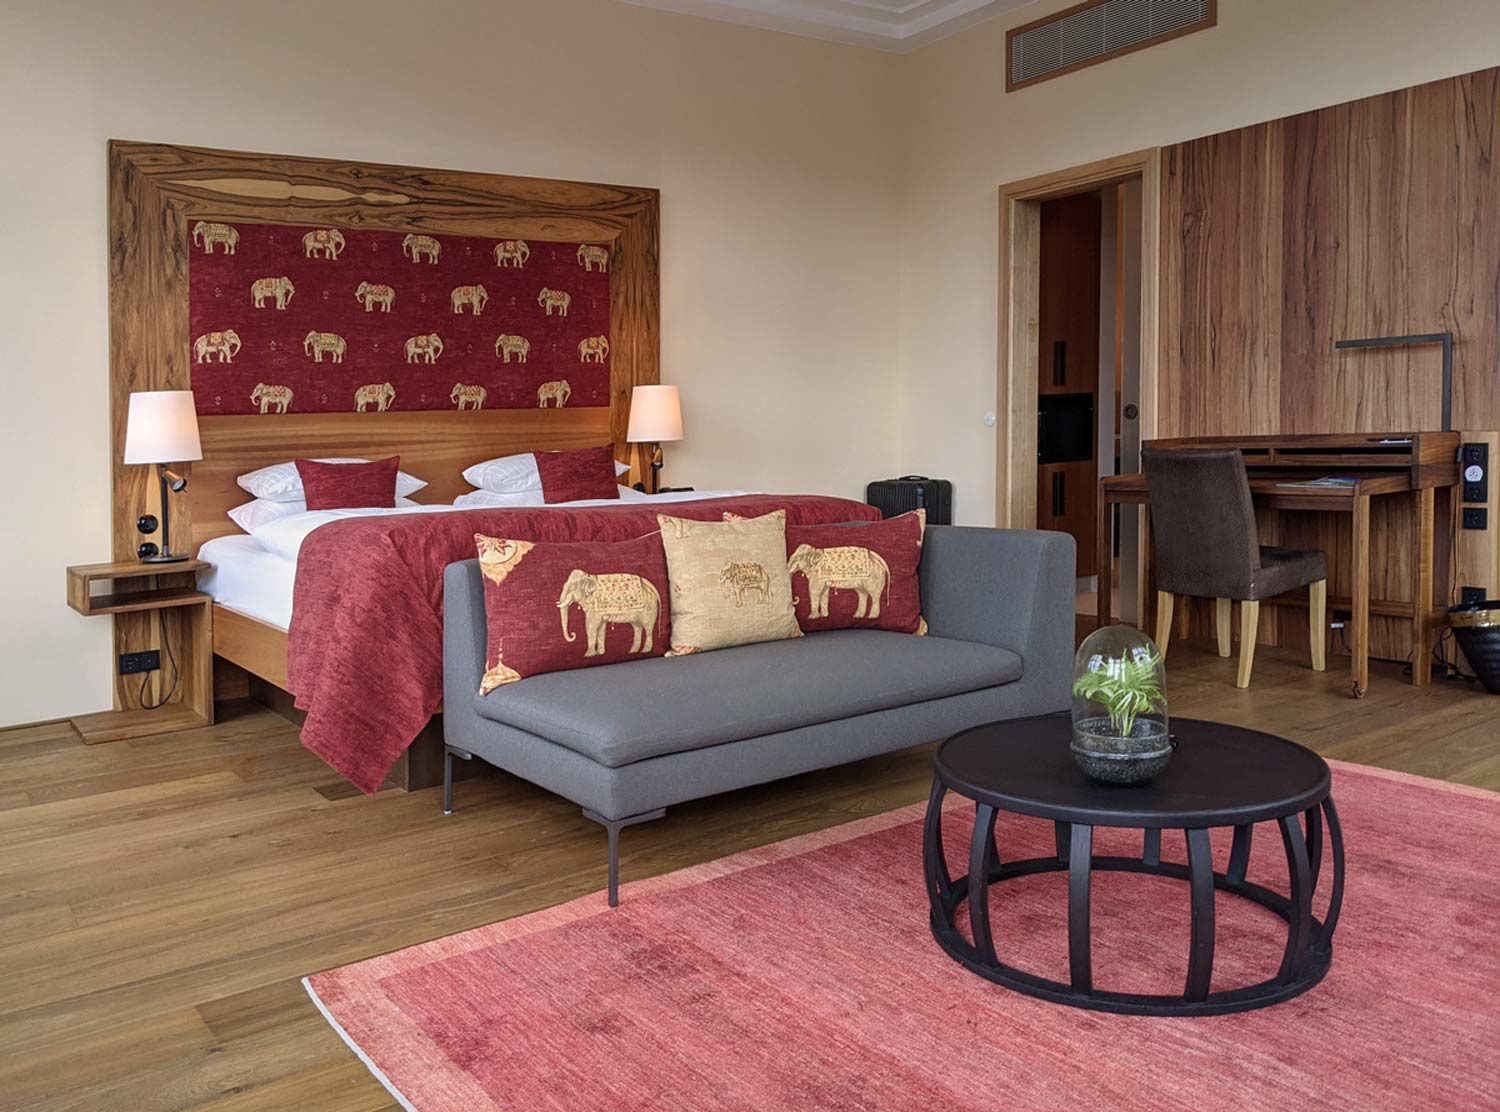 Orania Berlin Elephants adding the extra touch to your stay